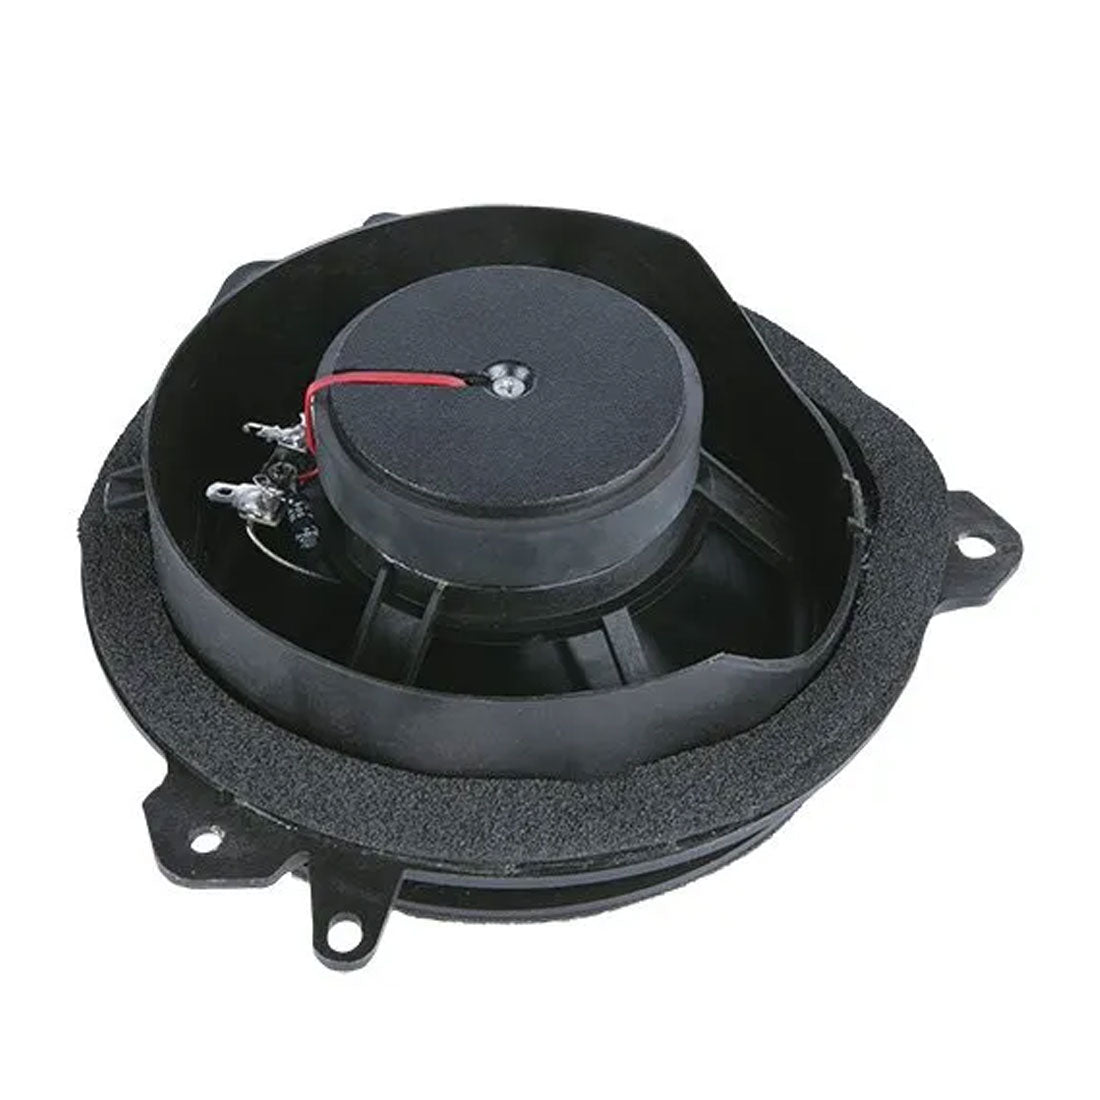 Memphis Audio PRXTY60 Power Reference 6.5" 2-Way Coaxial Speakers - Toyota OEM fit